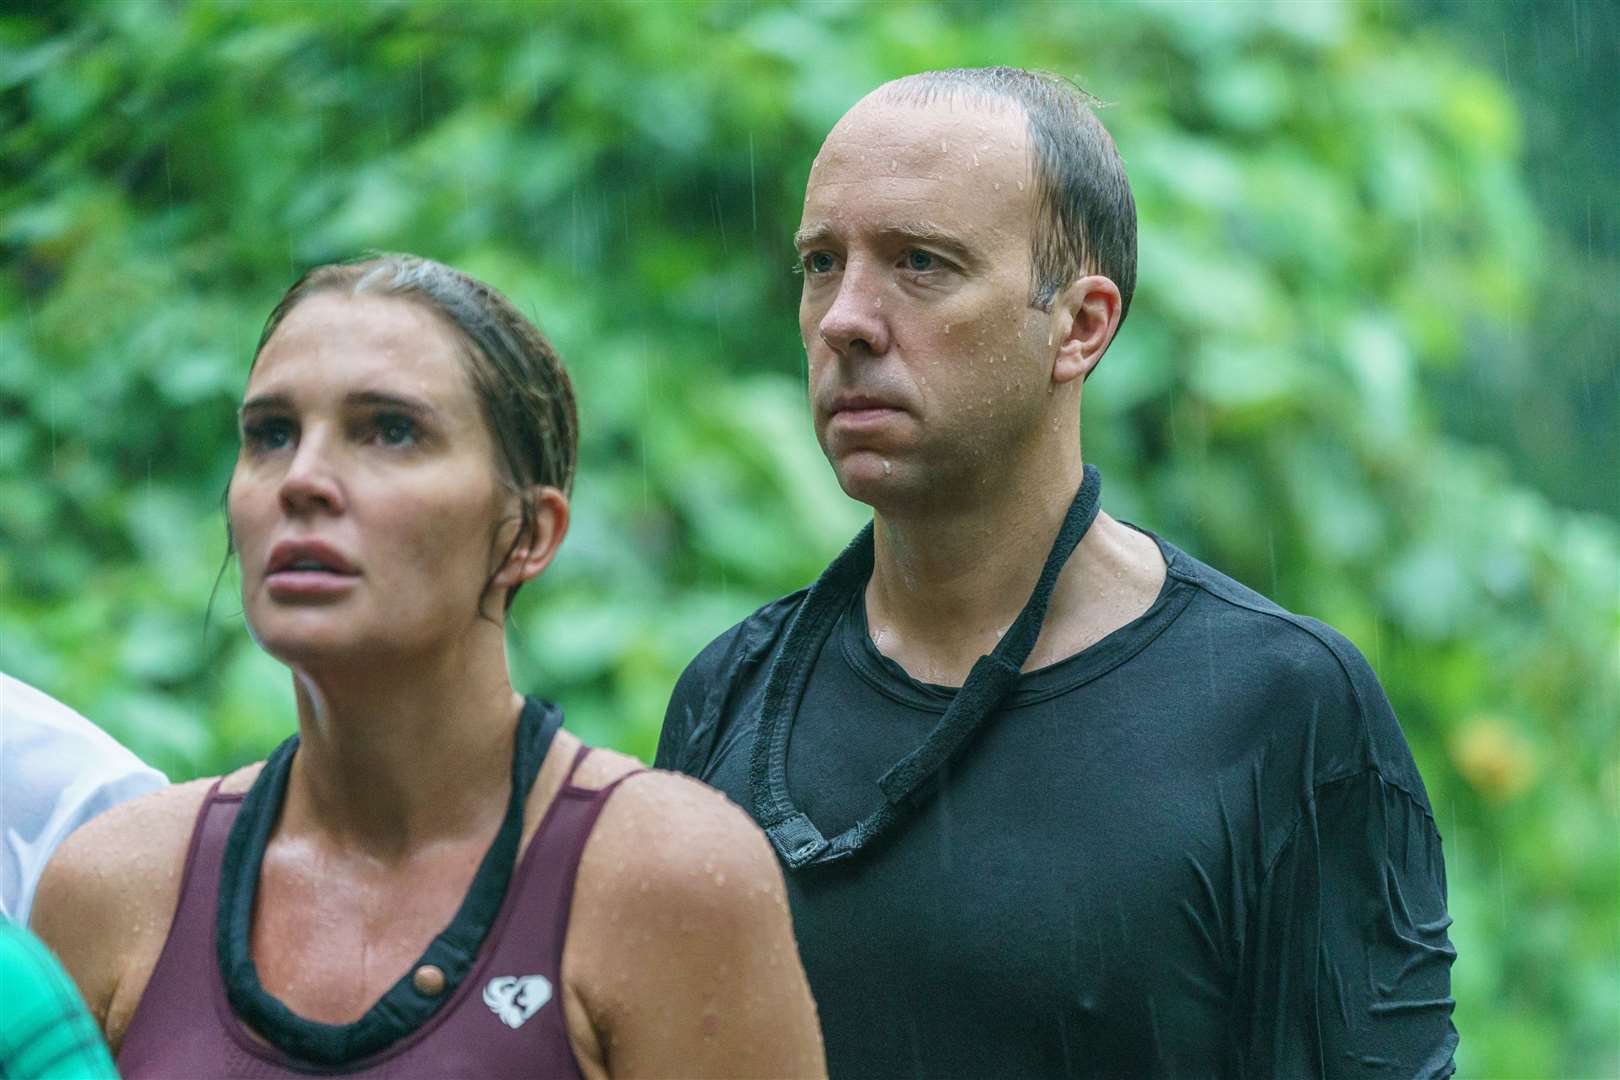 Matt Hancock and Danielle Lloyd taking part in Celebrity SAS: Who Dares Wins (Peter Dadds/Channel 4)